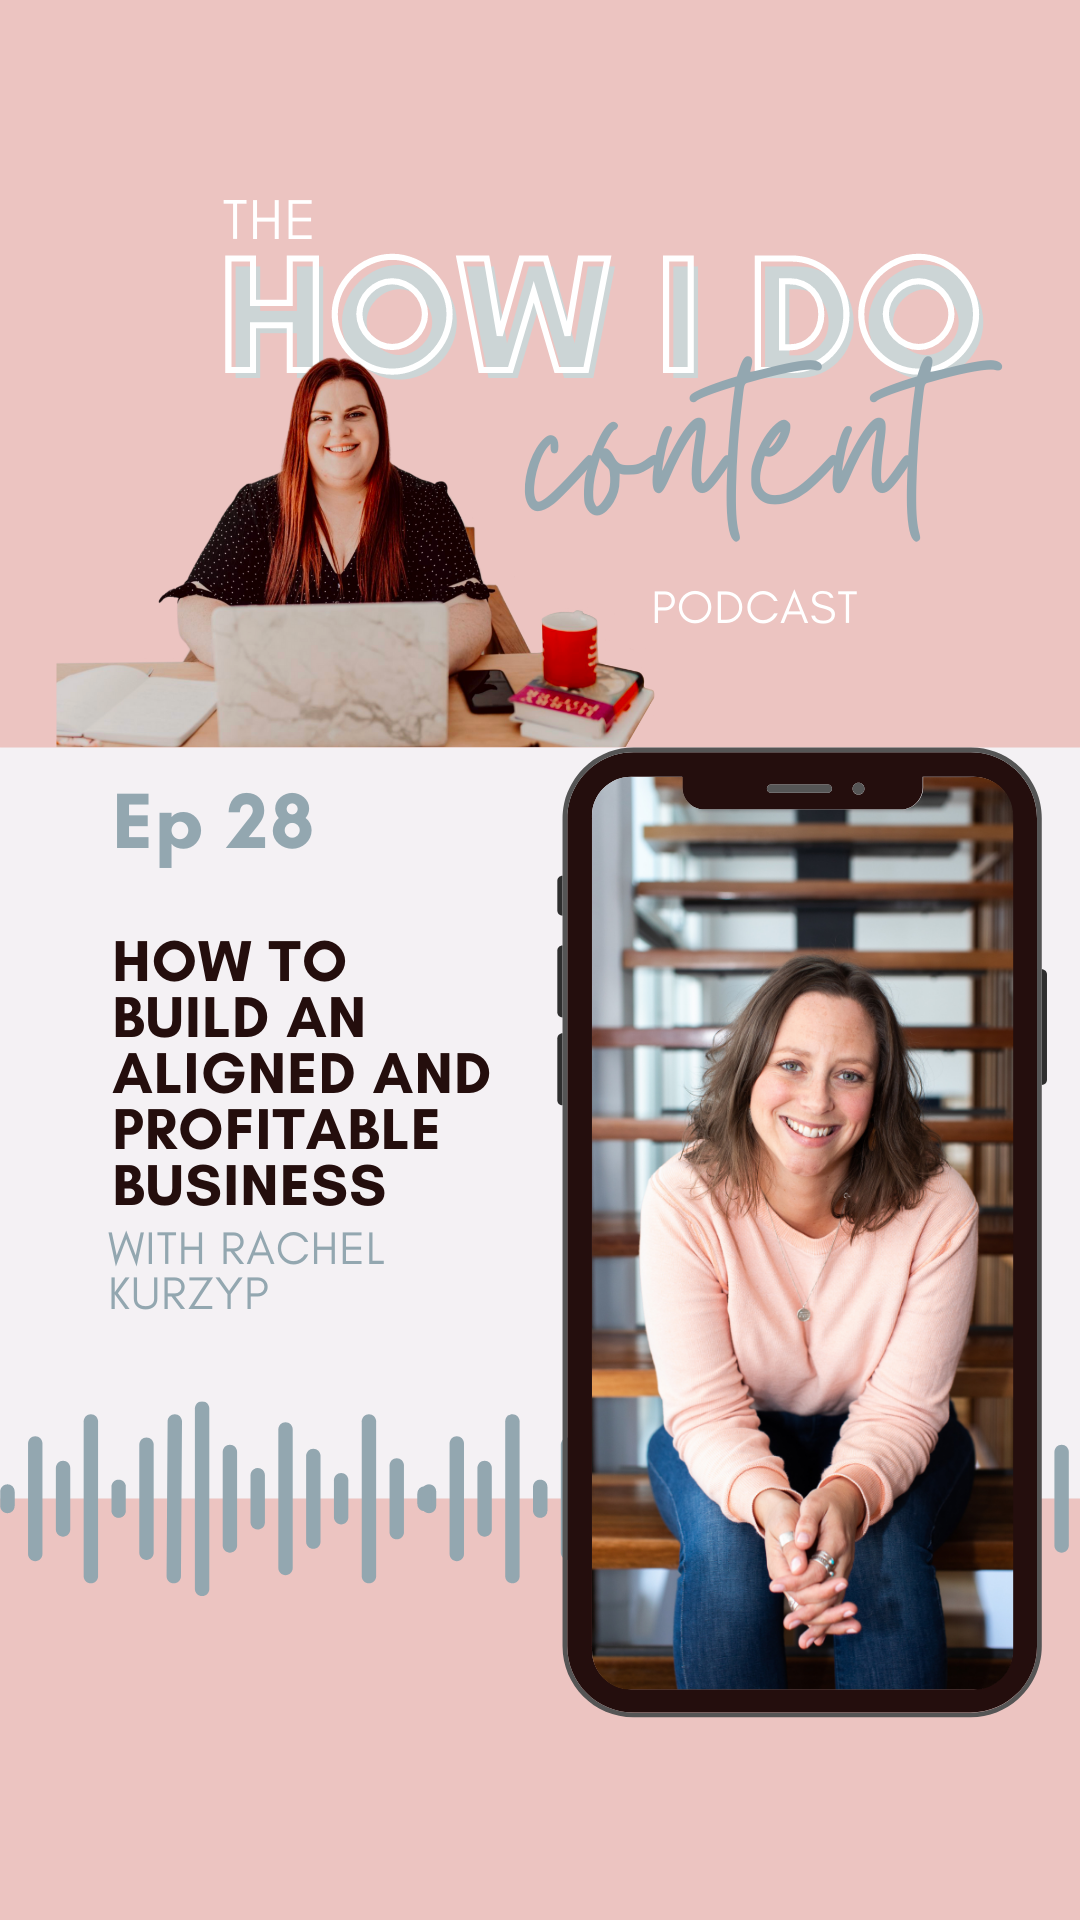 How to build an aligned and profitable business with Rachel Kurzyp